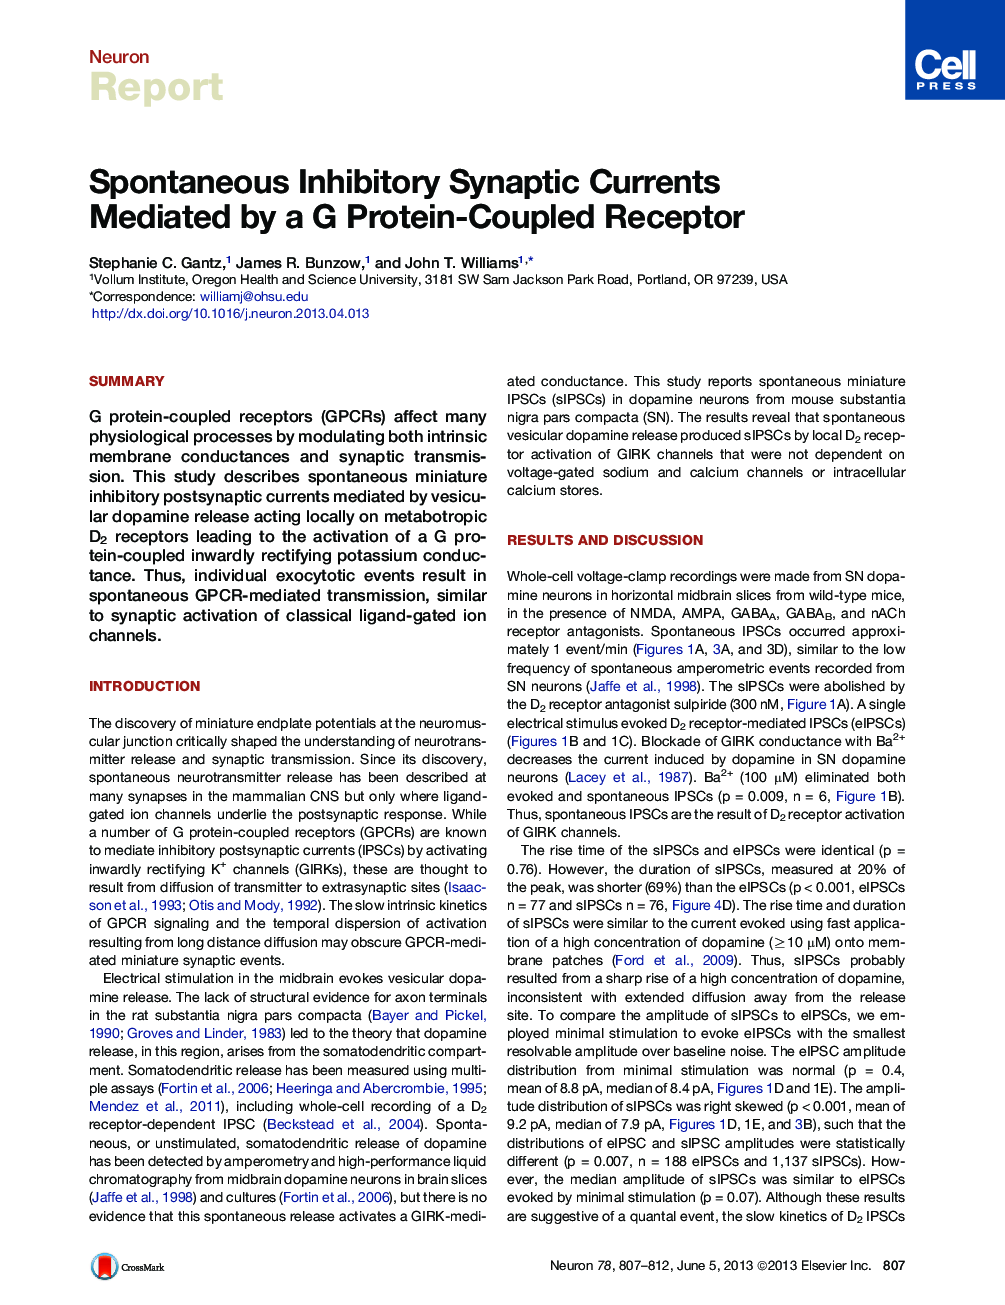 Spontaneous Inhibitory Synaptic Currents Mediated by a G Protein-Coupled Receptor